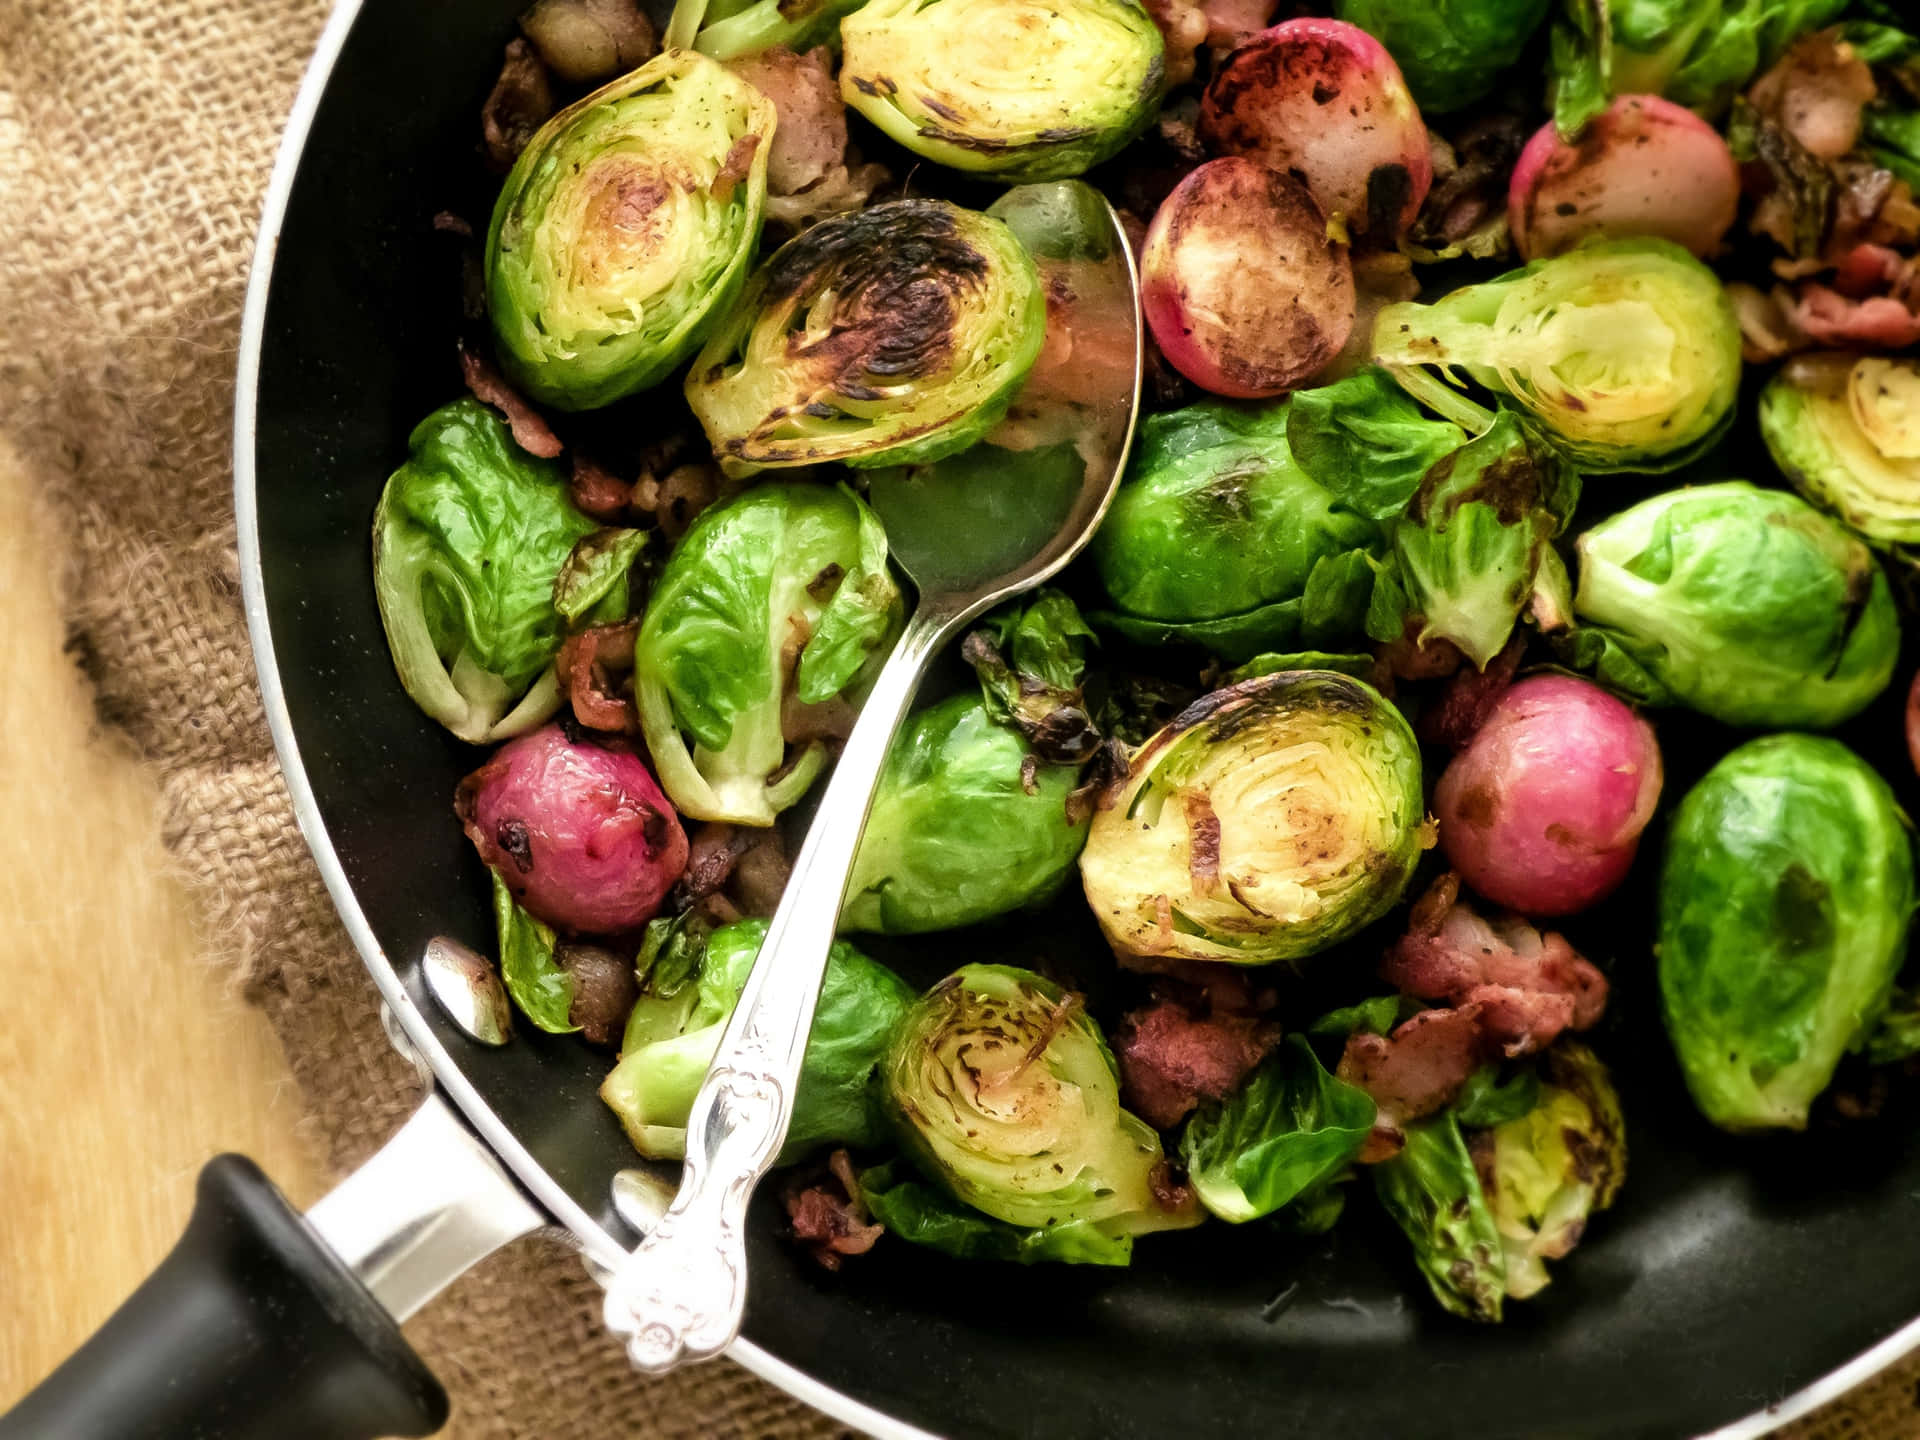 Fresh and Vibrant Brussel Sprouts Up Close